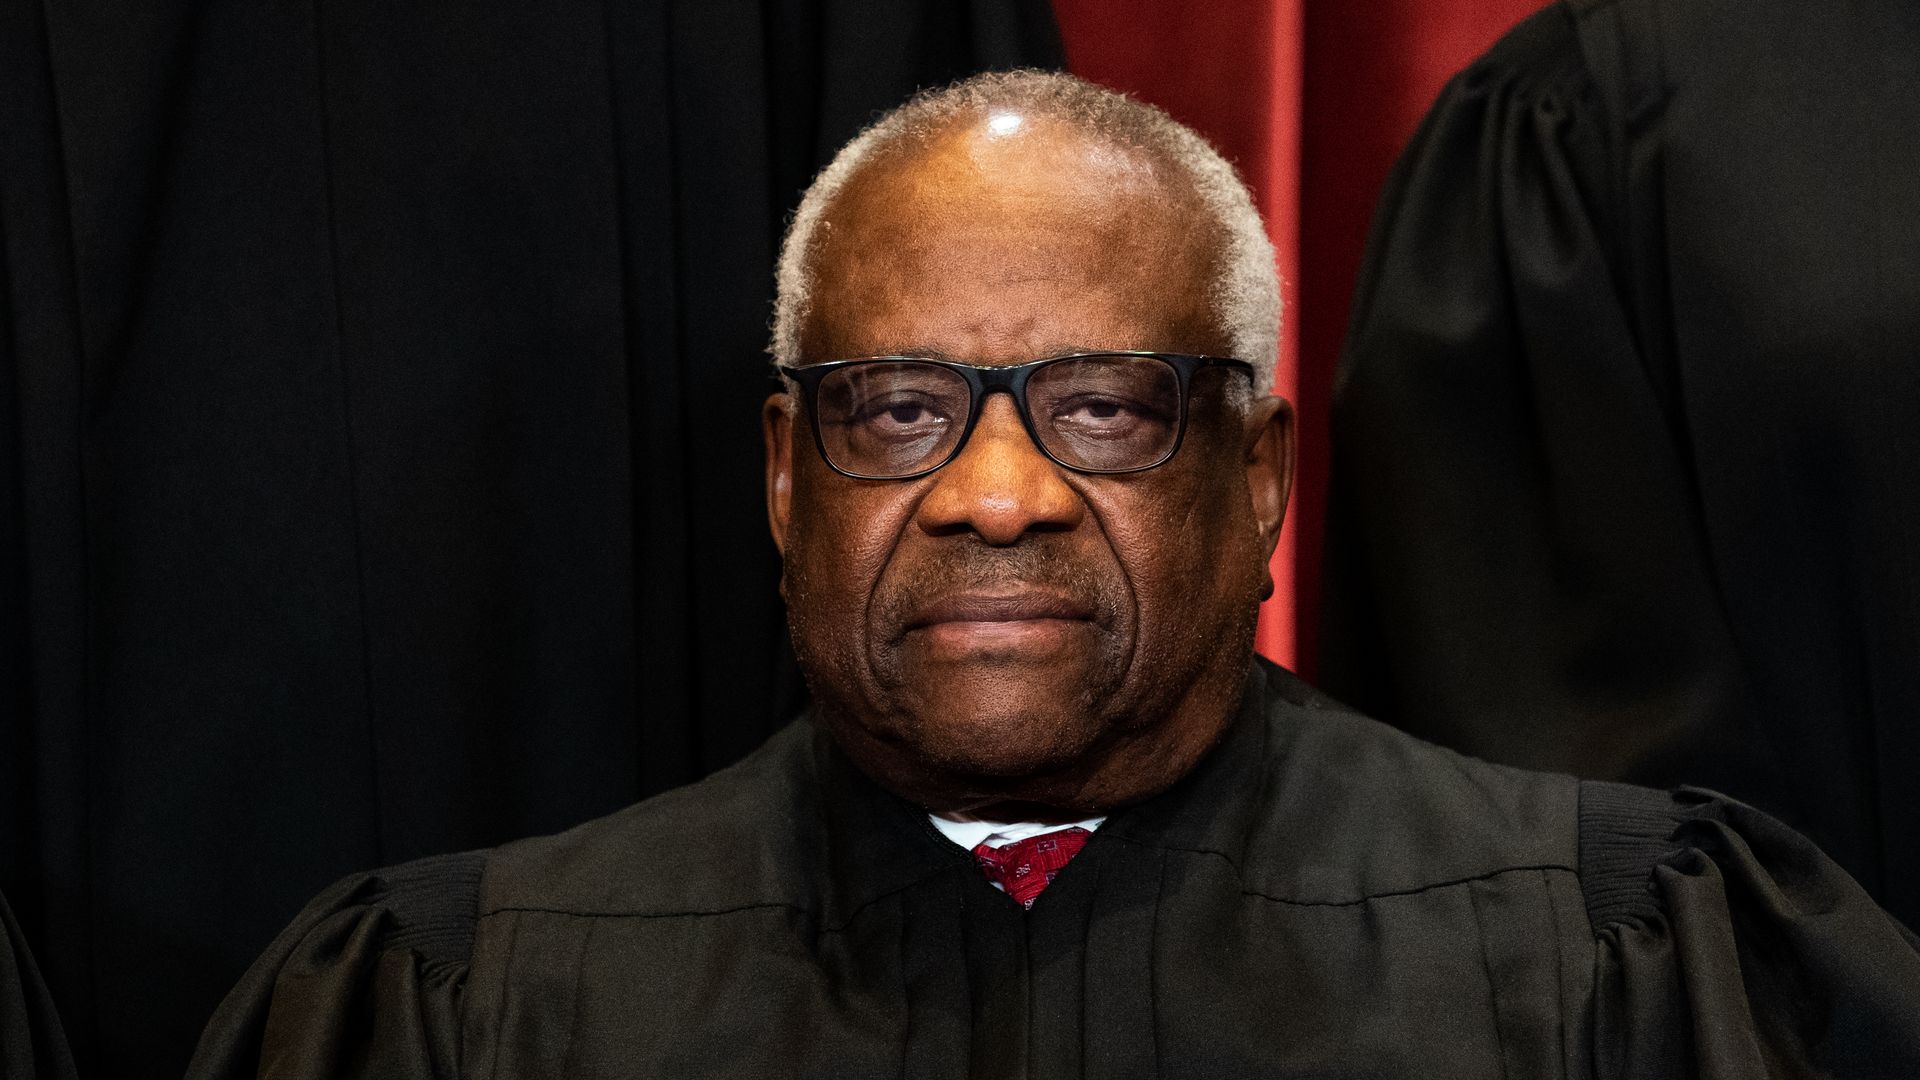 Clarence Thomas, associate justice of the U.S. Supreme Court, during the formal group photograph at the Supreme Court in Washington, D.C., U.S., on Friday, April 23, 2021. 